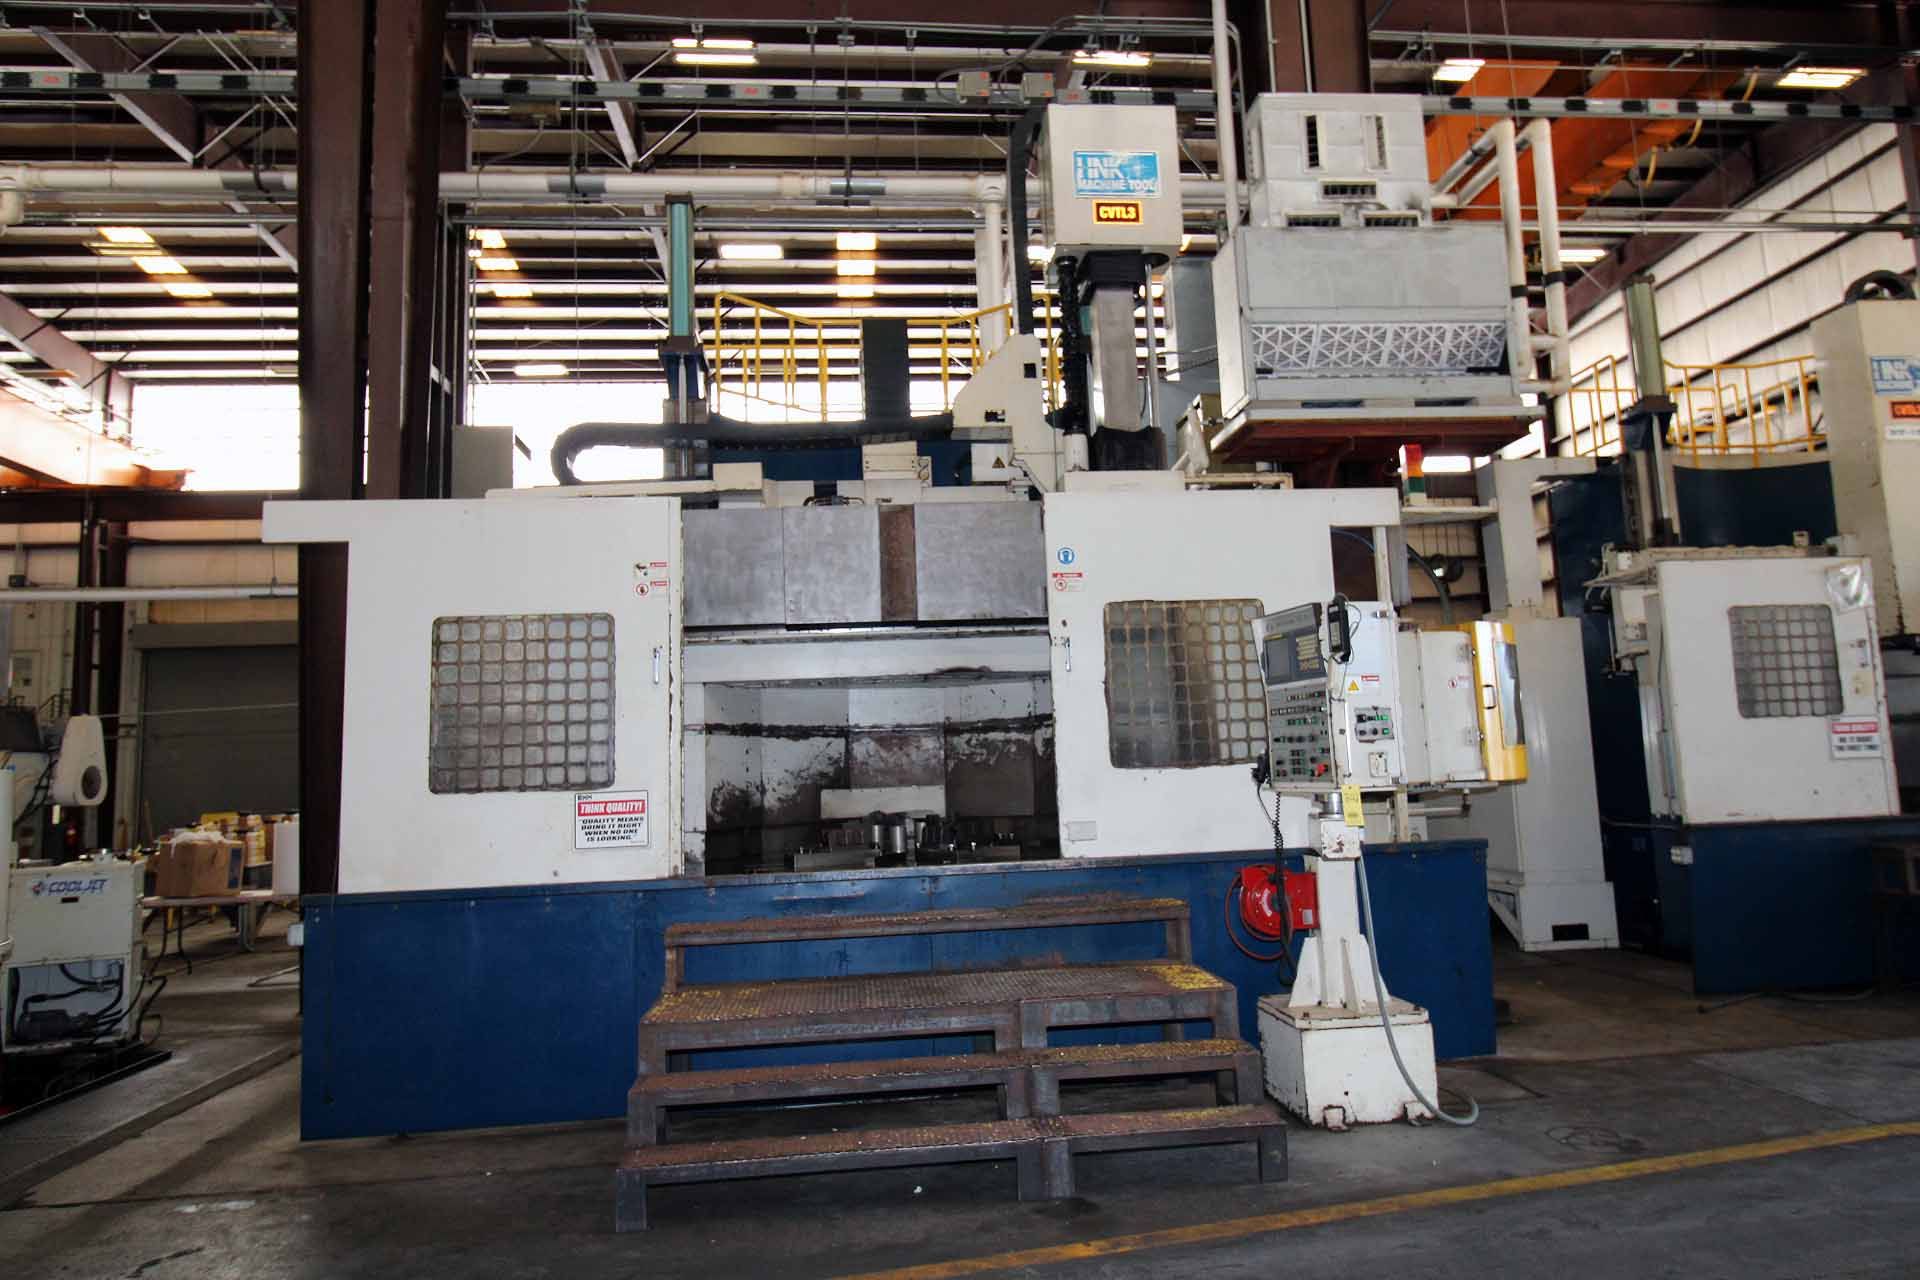 CNC VERTICAL TURNING CENTER, HNK MDL. VTC20/25, new 2007, Fanuc 18i-TB CNC control, 78.7” table